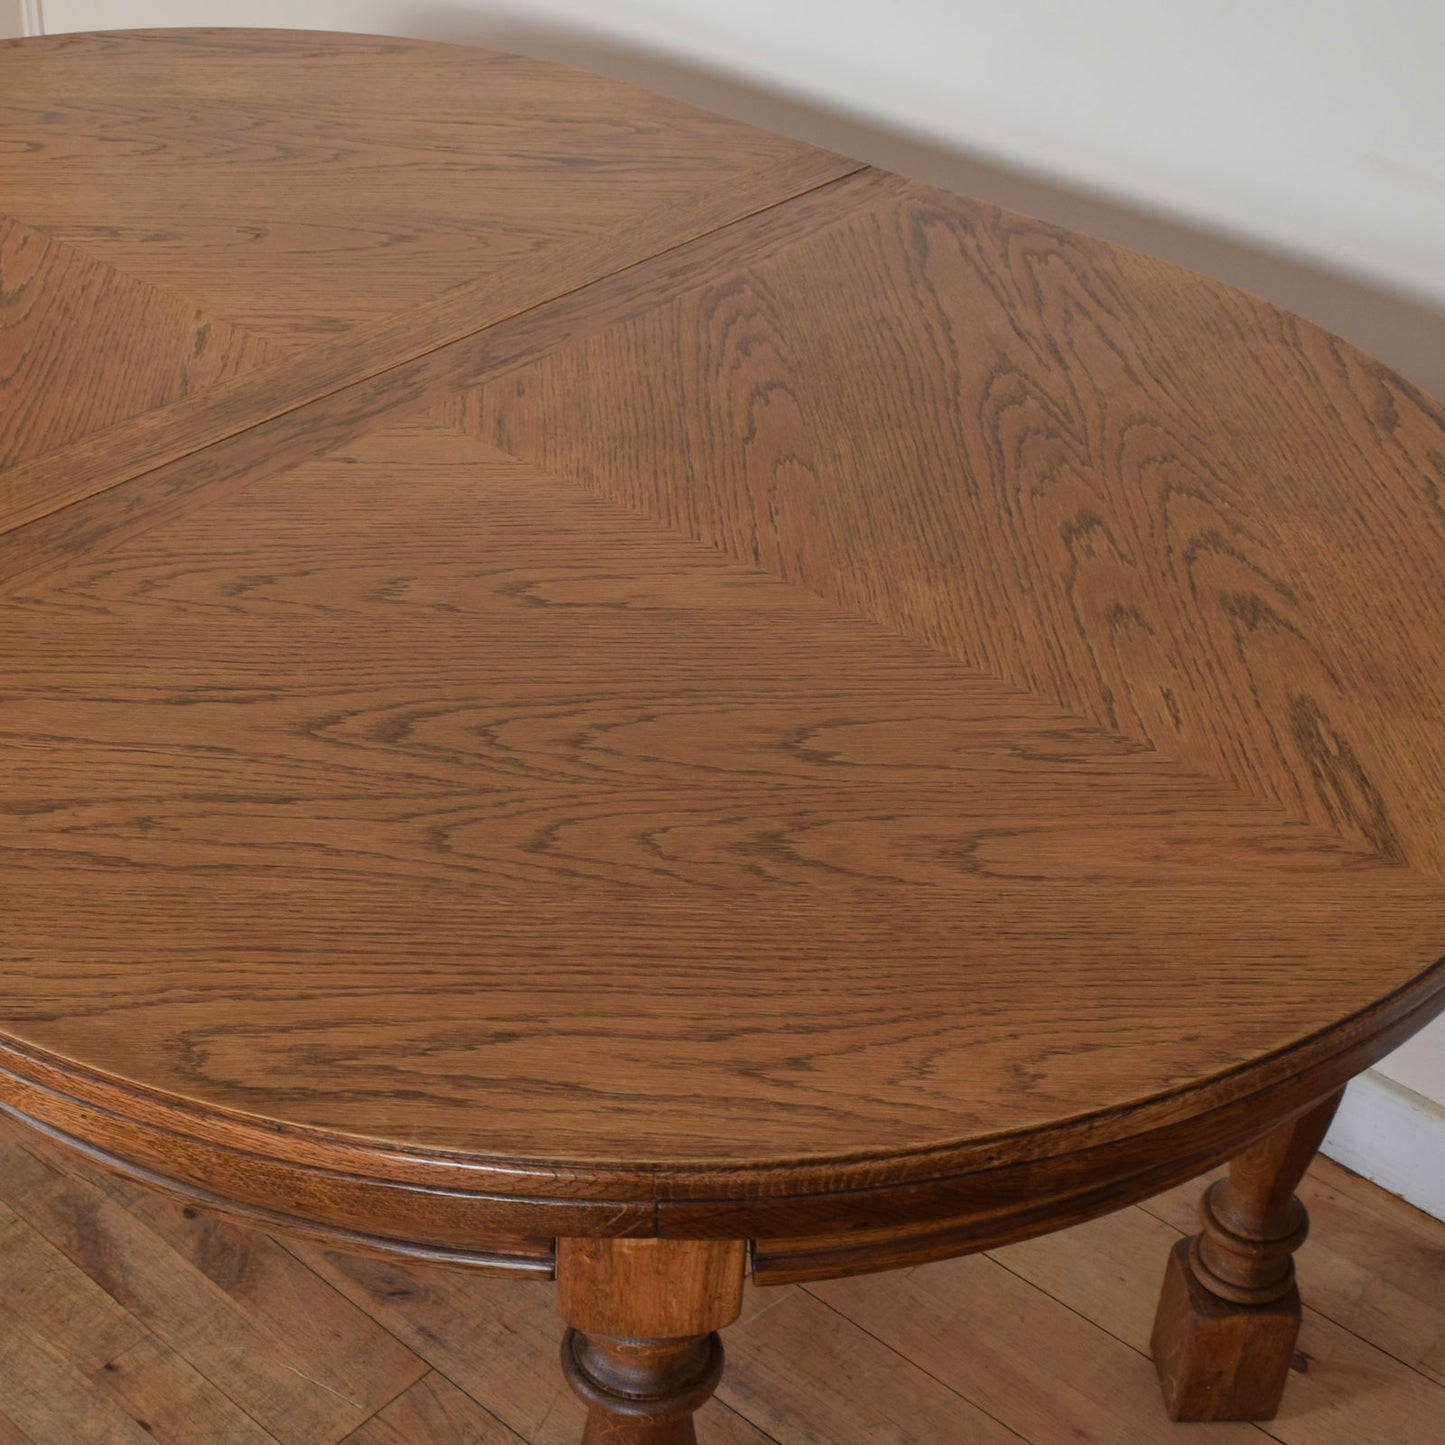 Restored Oak Table and Six Chairs